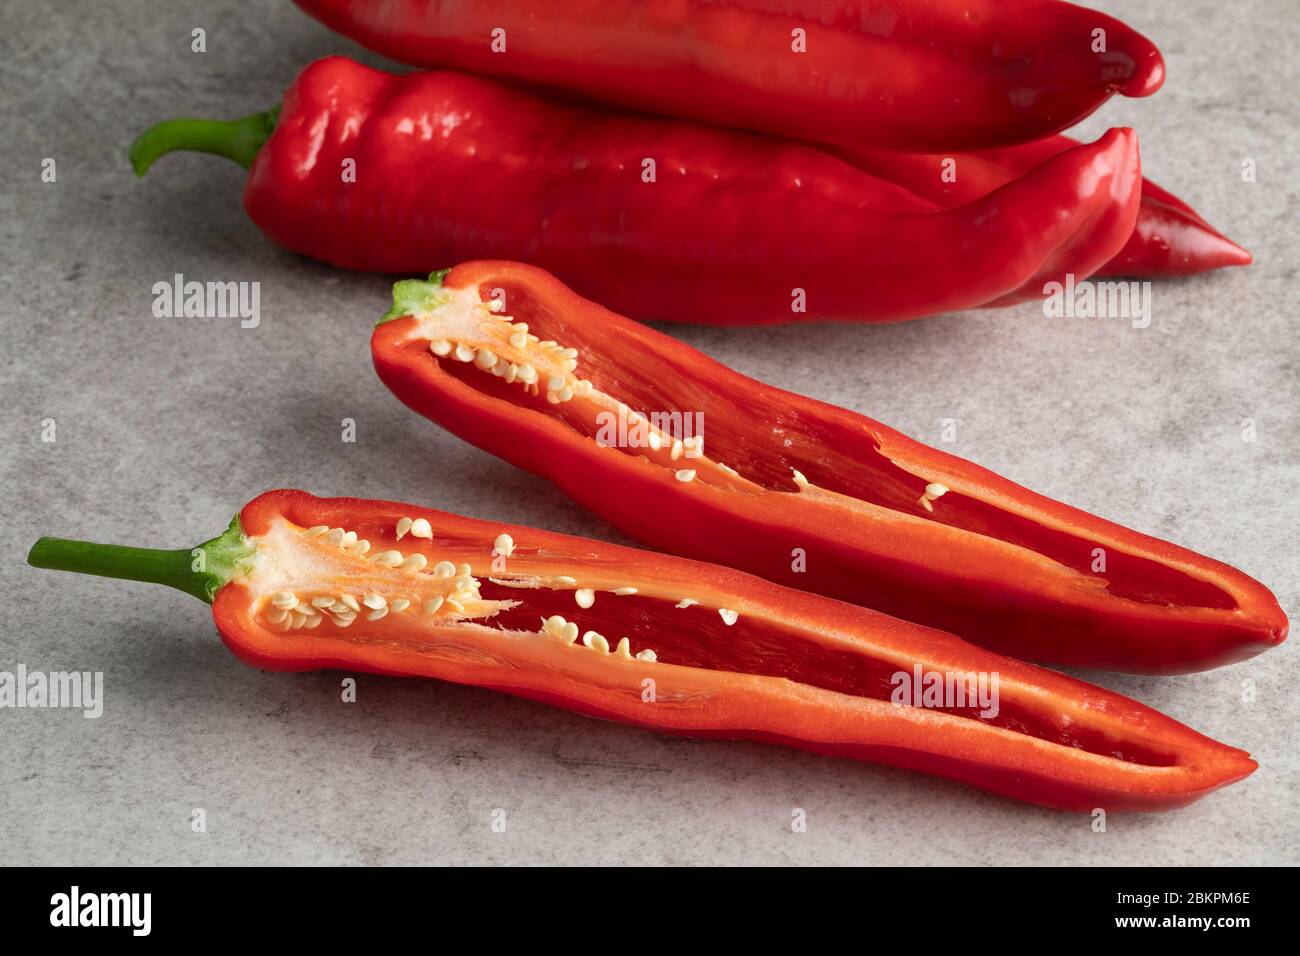 Sliced fresh red sweet pointed pepper close up Stock Photo